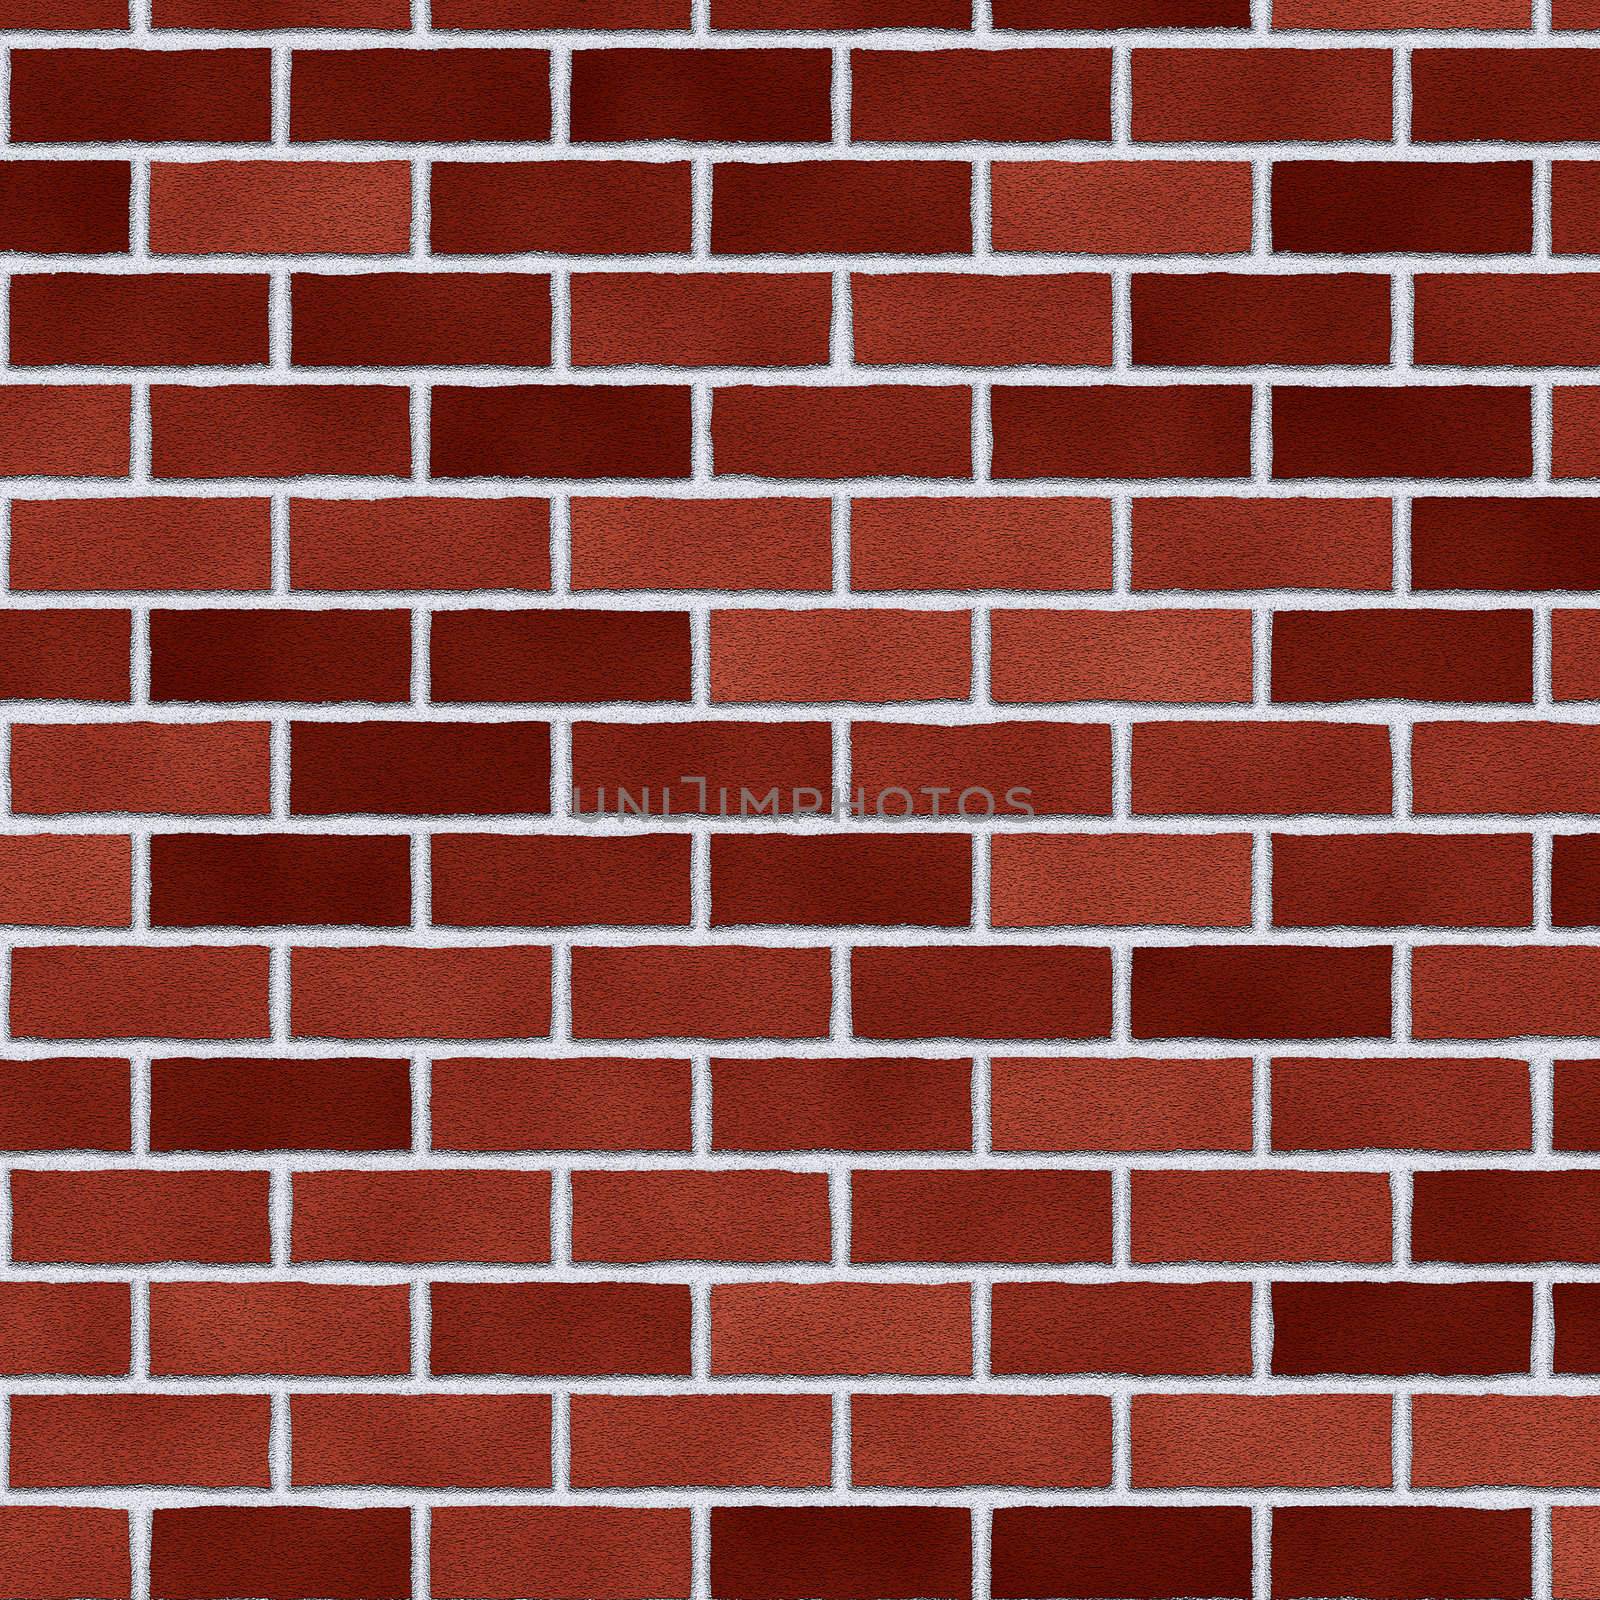 Brick pattern texture in shades of red